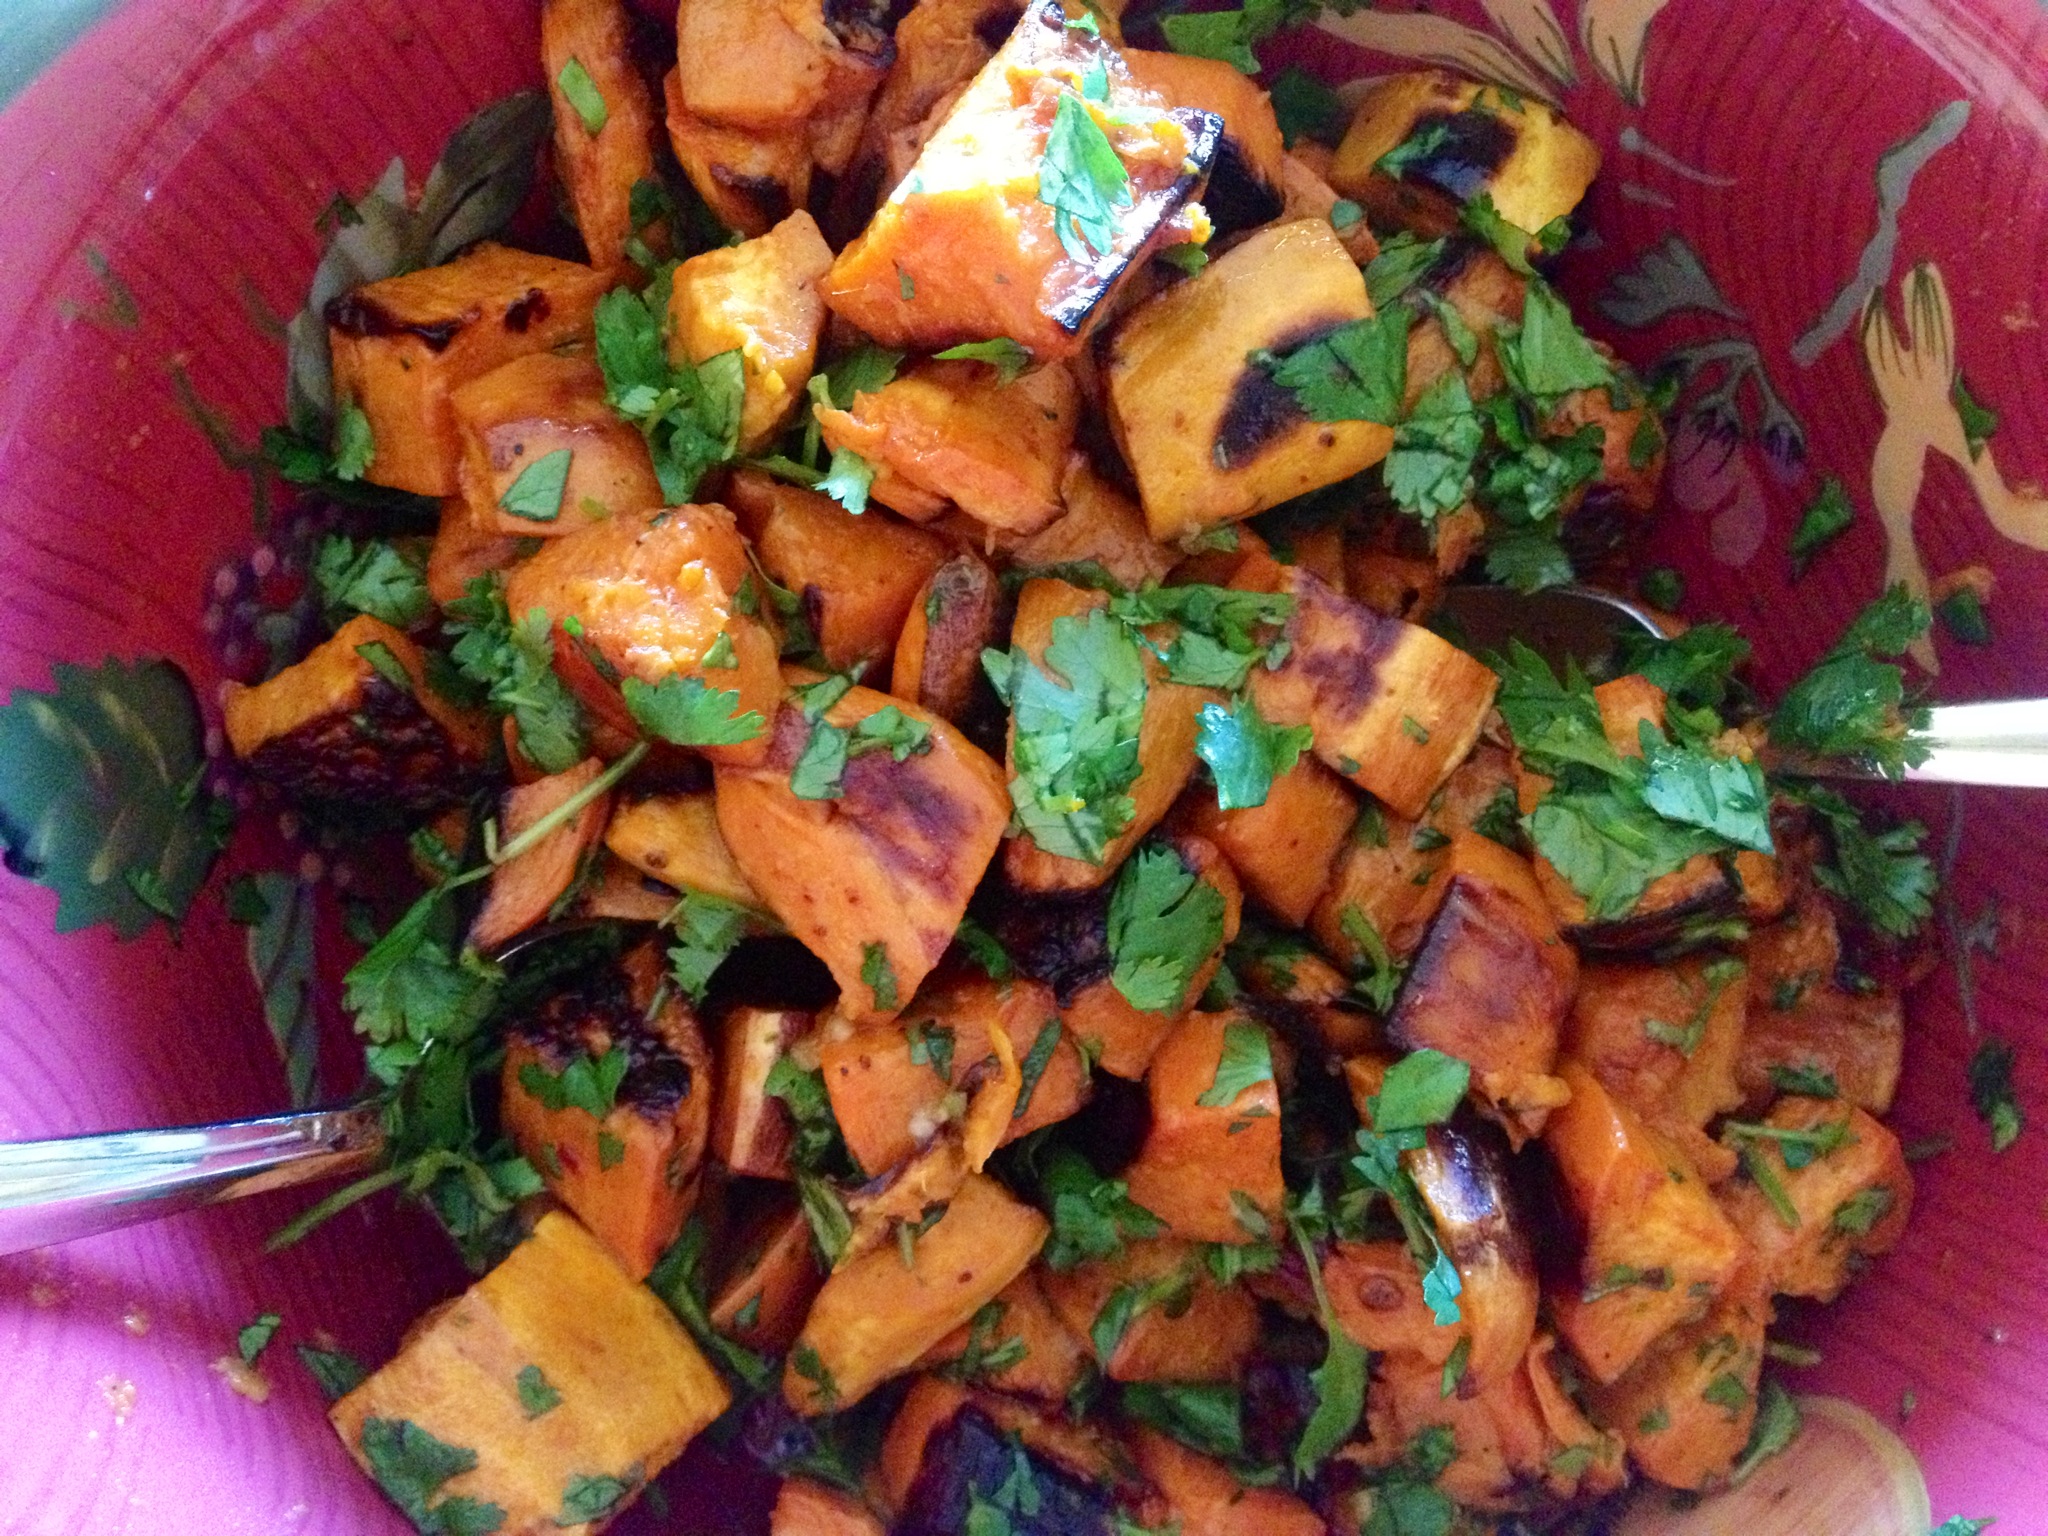 Roasted chopped sweet potatoes with cilantro